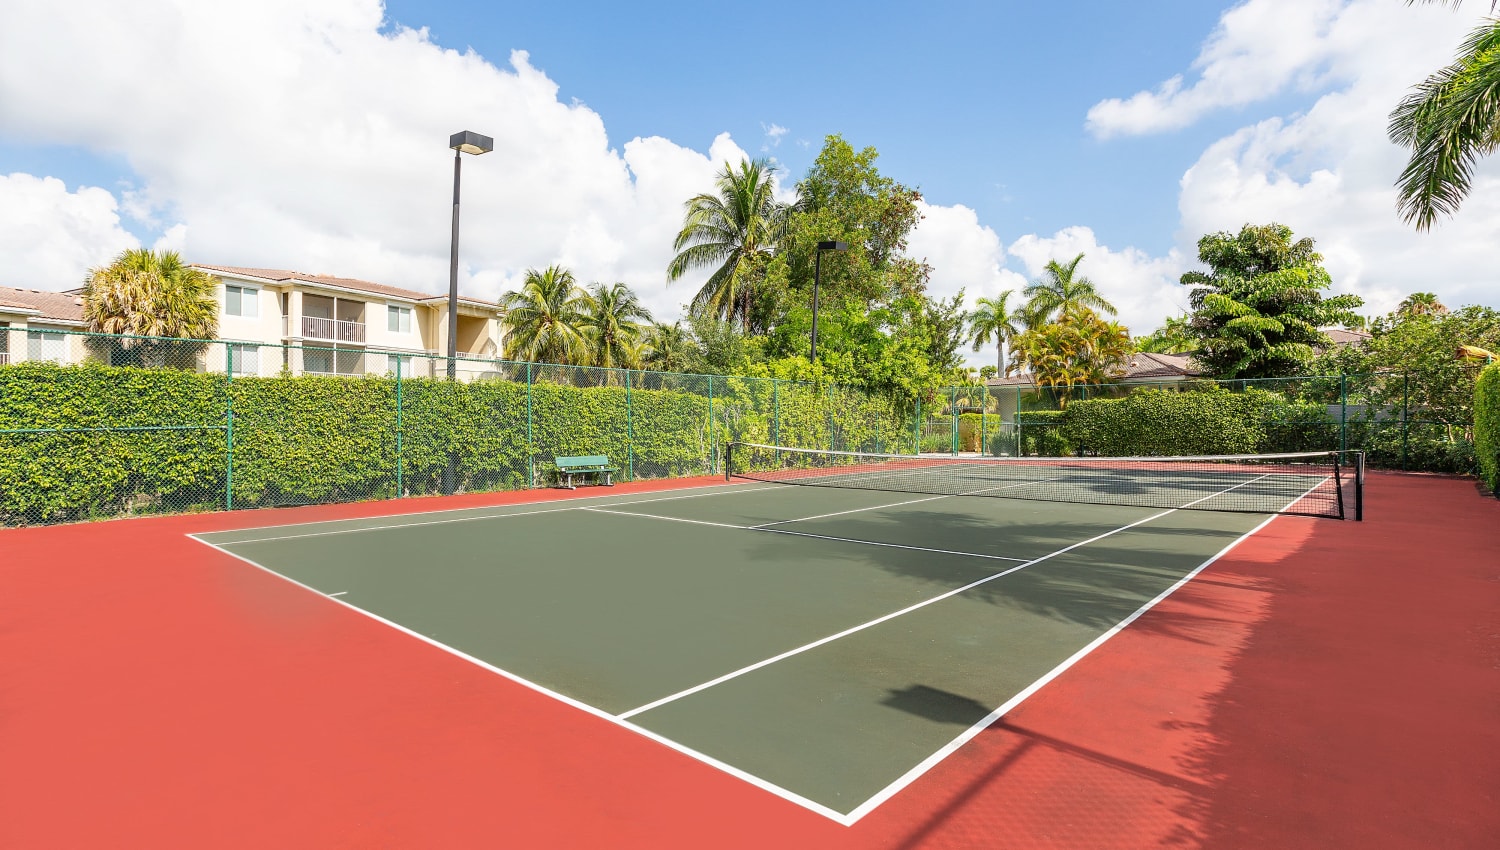 Tennis court at Ibis Reserve Apartments in West Palm Beach, Florida